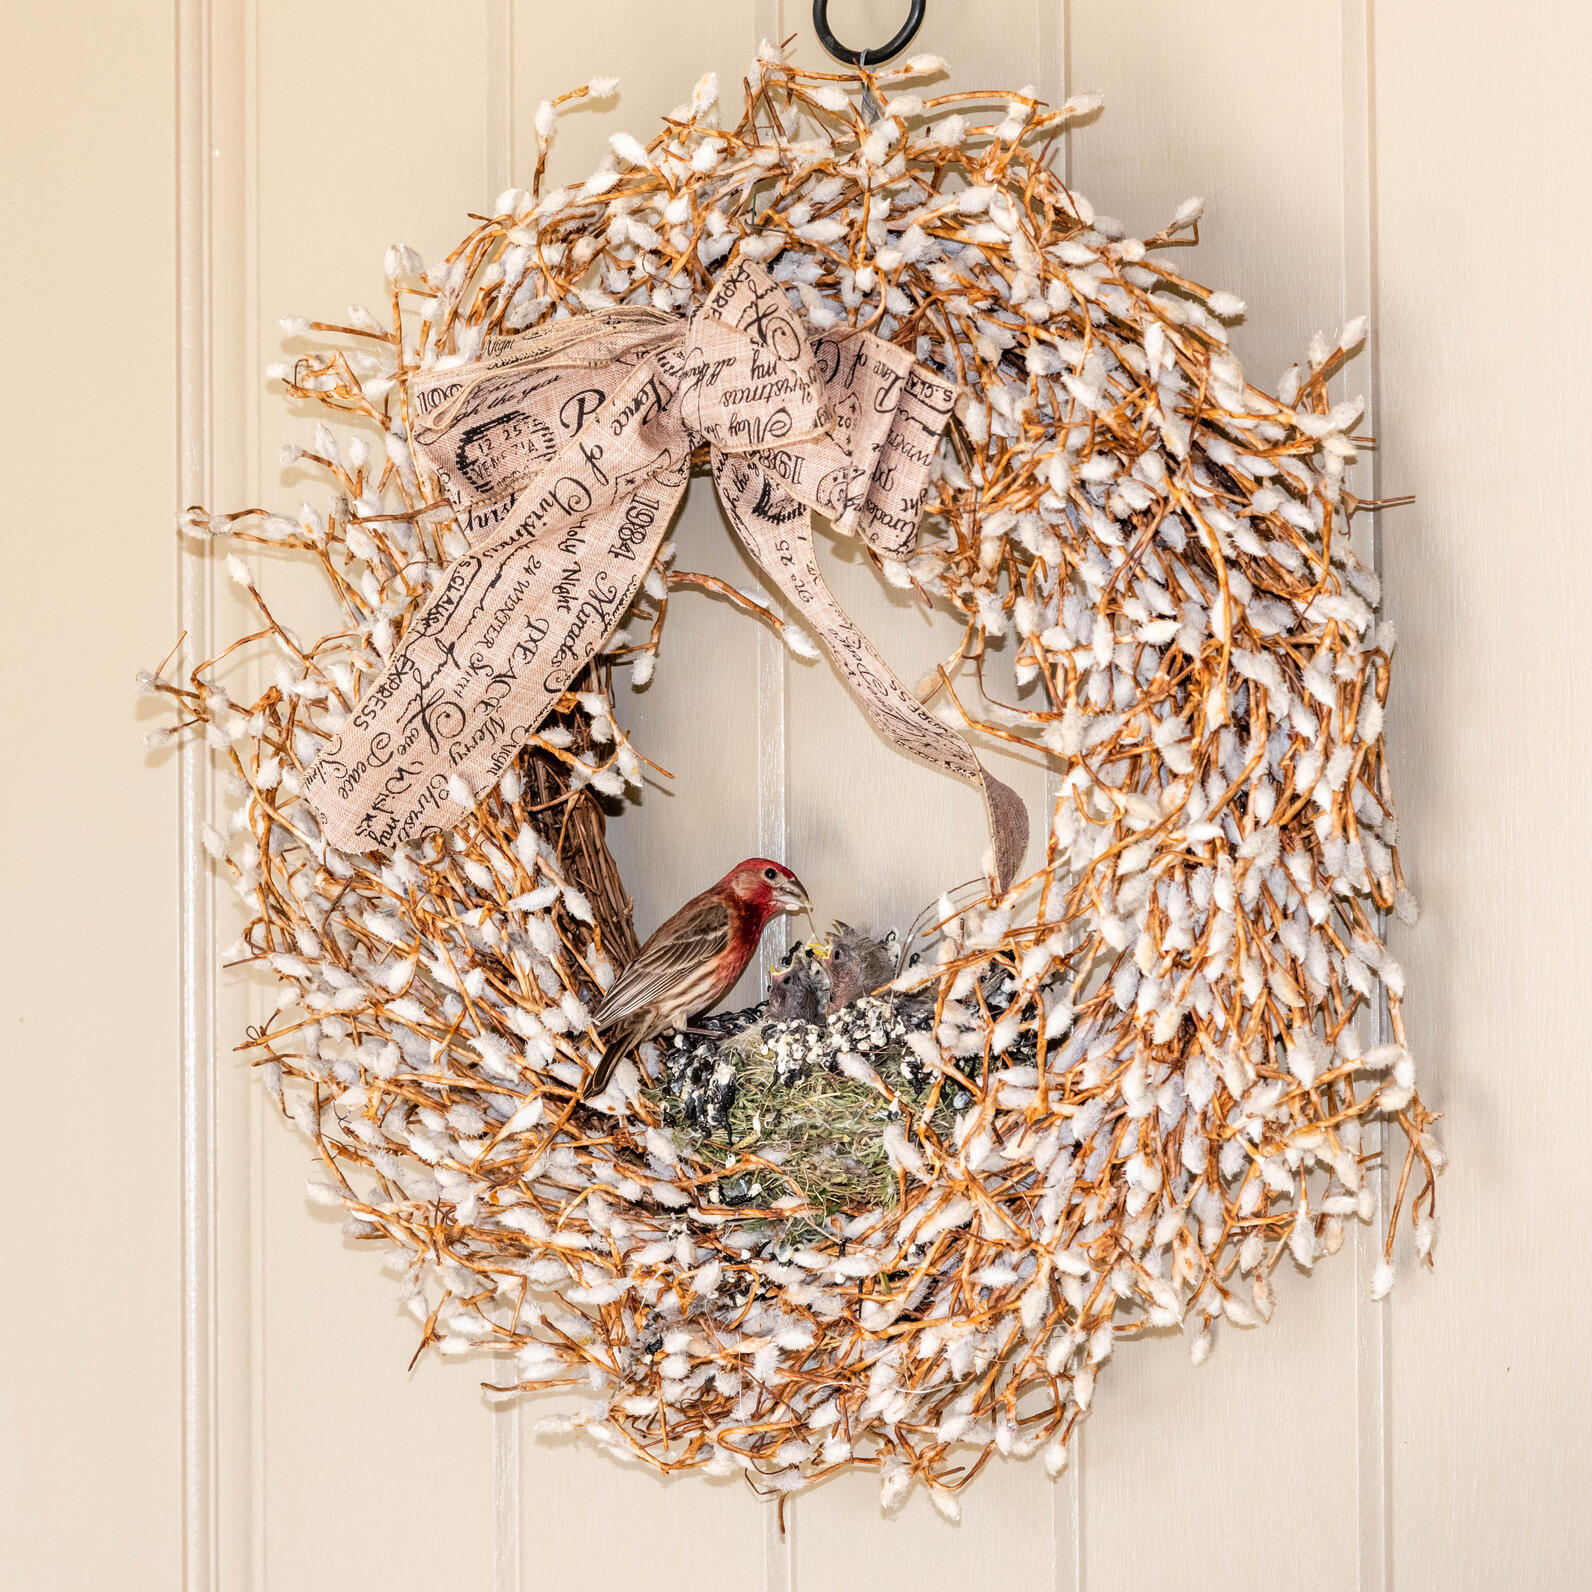 A House Finch brings food to its young in a nest which sits within a front door wreath. 